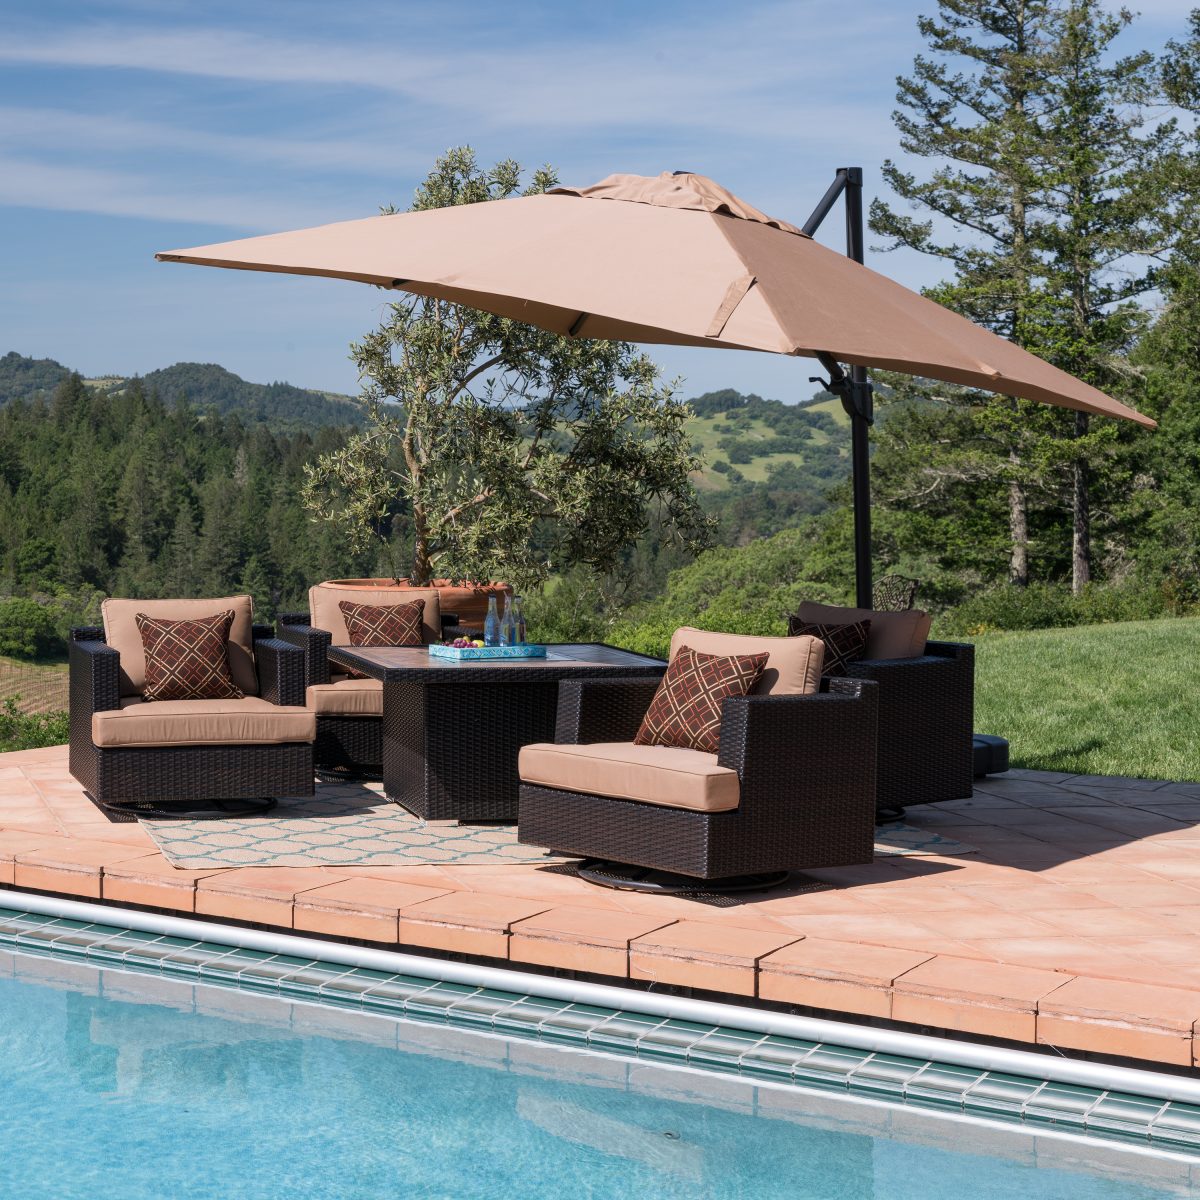 Matching Umbrellas to Patio /></p>
<p>After you’ve squared away all the logistical details, choose an umbrella that best speaks to your sense of style. Patio umbrellas round out an outdoor seating area with grace and balance. Select a color that borrows from the seat cushions of your patio set or choose an umbrella base that matches the materials woven into your outdoor design.</p>
<p>A wooden pole blends with a country-inspired look, for example, while a metallic, aluminum or stainless steel fits into a sleep, modern layout. Go a step further by choosing a modern selection with ambient LED lights for evenings outside, such as the Starsong Borealis 9-Foot 30 LED Garden Umbrella .</p>
<p>As with any other patio purchase, large outdoor patio umbrellas should further bring your outdoor dining and seating area to life, welcoming everyone to gather and chat on a sunny day. Check out Starsong’s patio furniture buying guide and see what pieces you can add to your space to go with your new patio umbrella.</p>